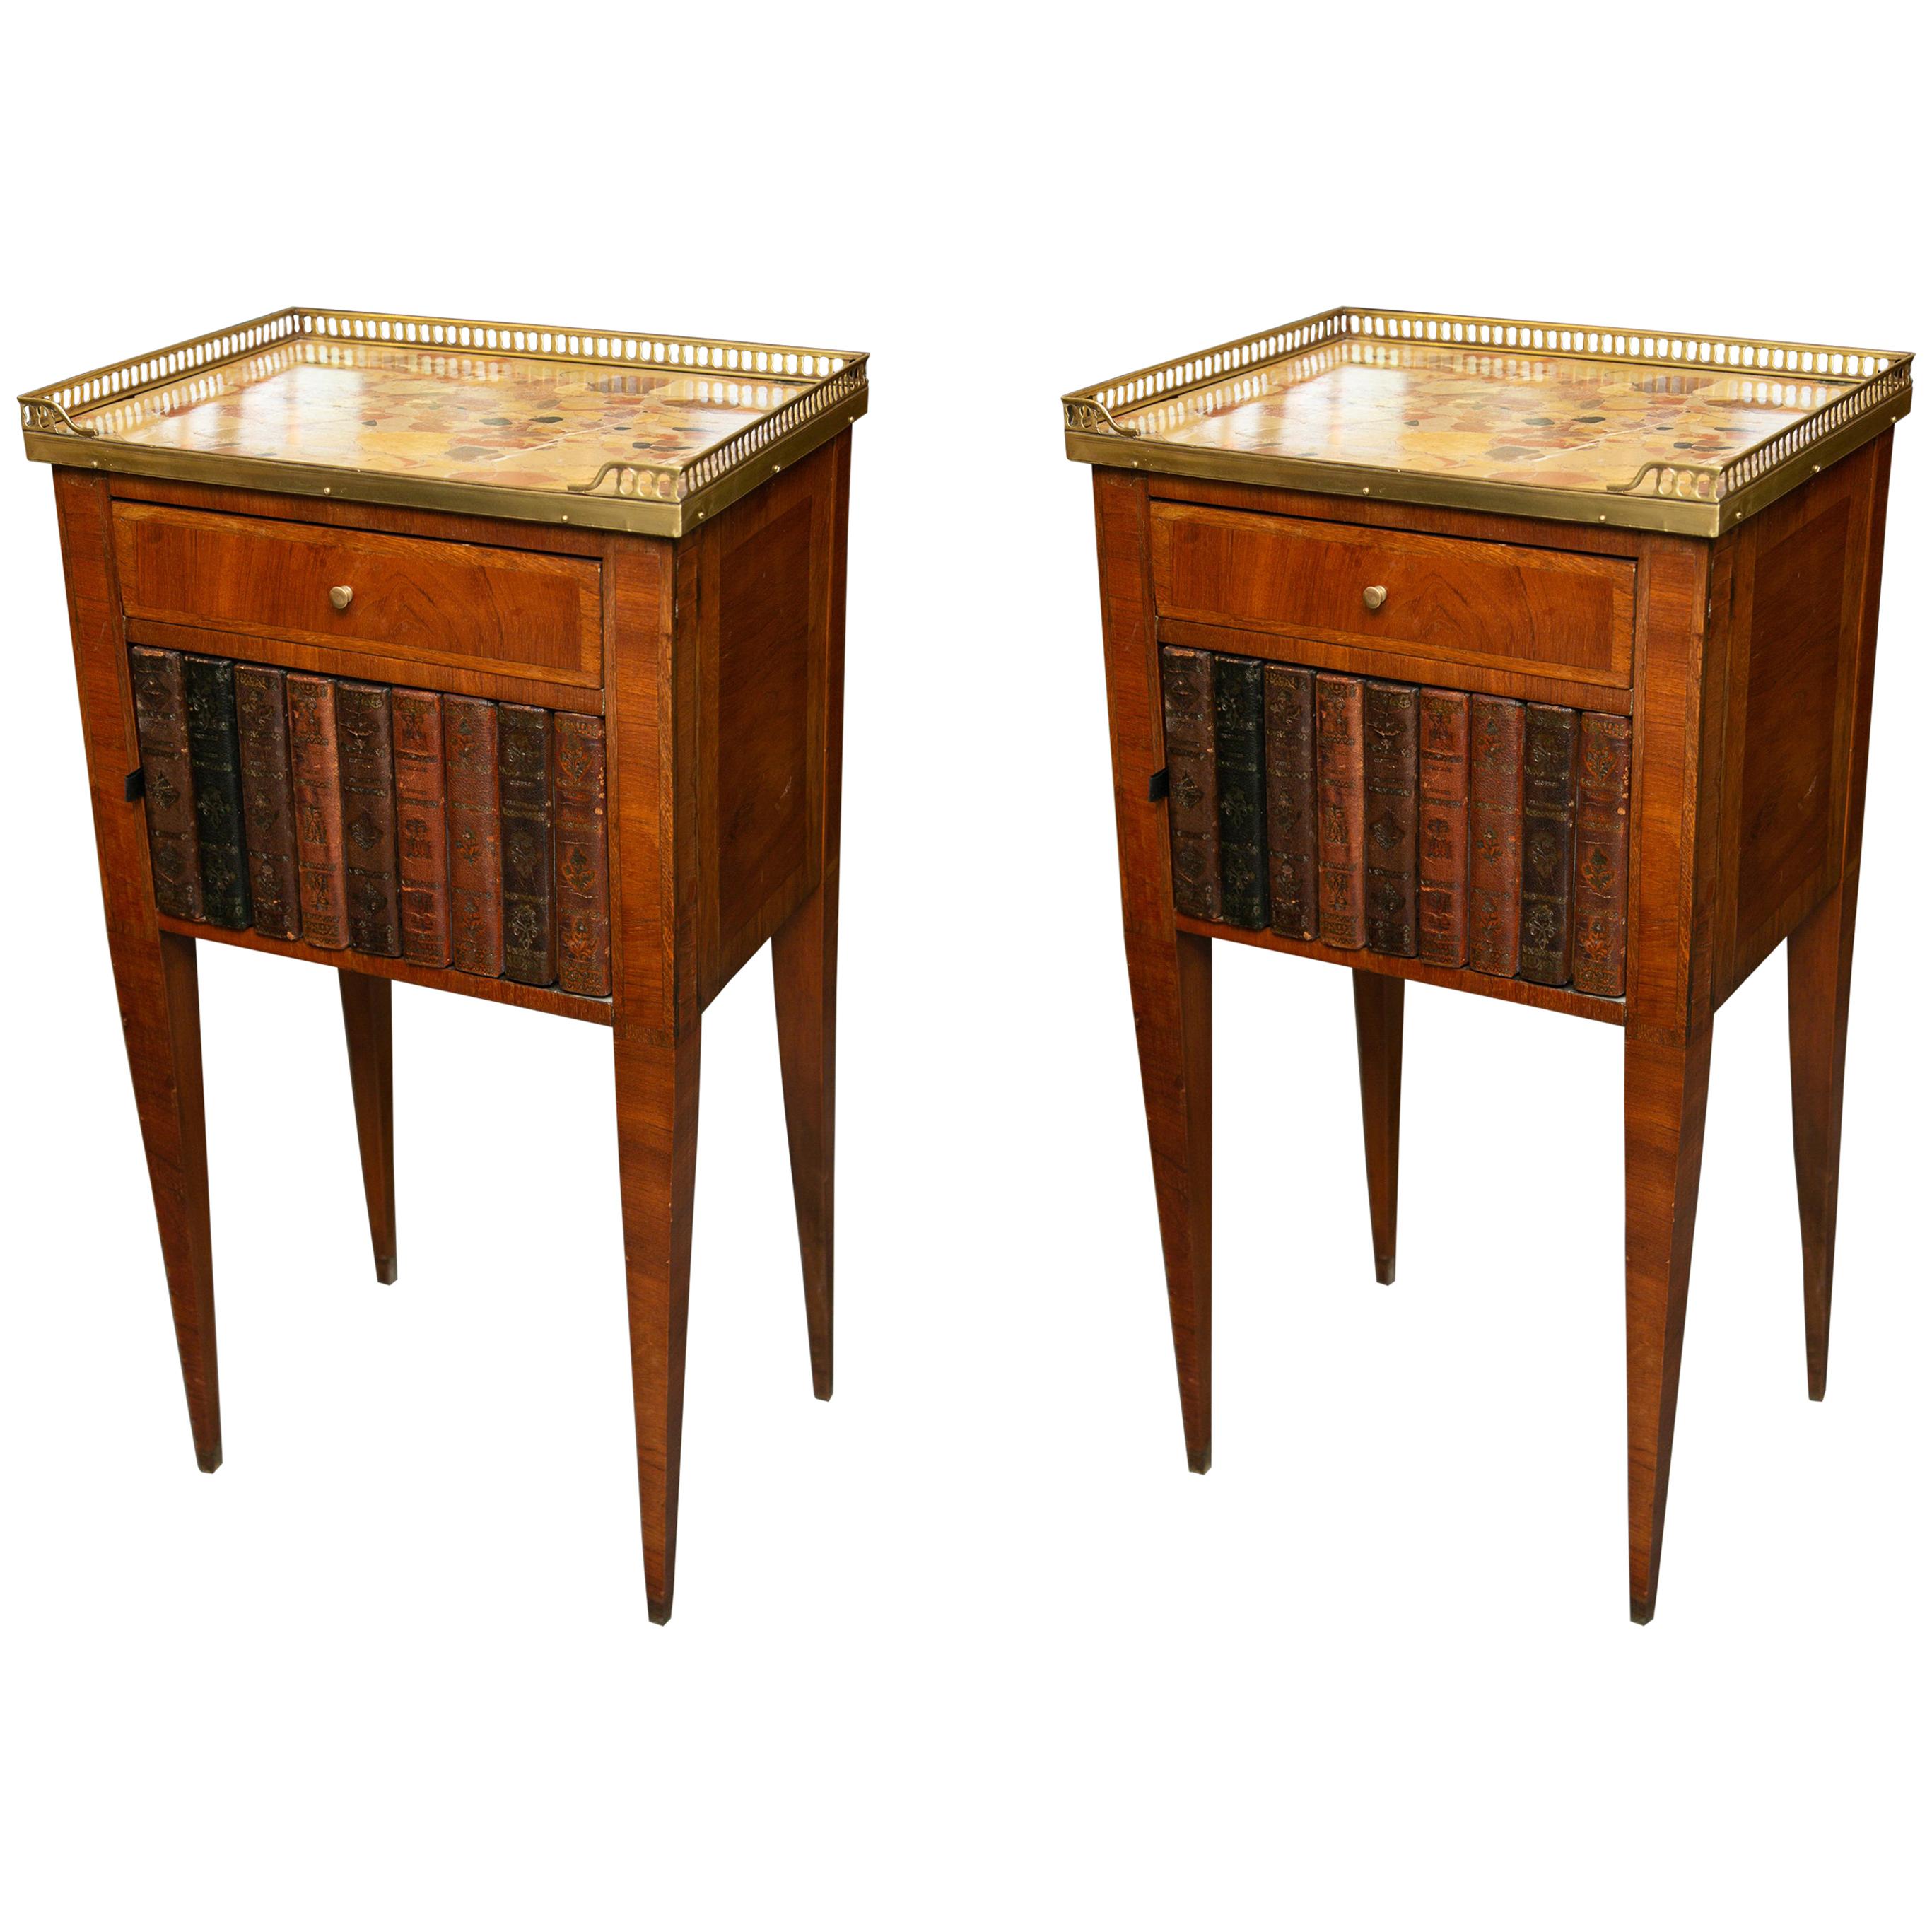 Pair of Mahogany Louis XVI Style Side Tables